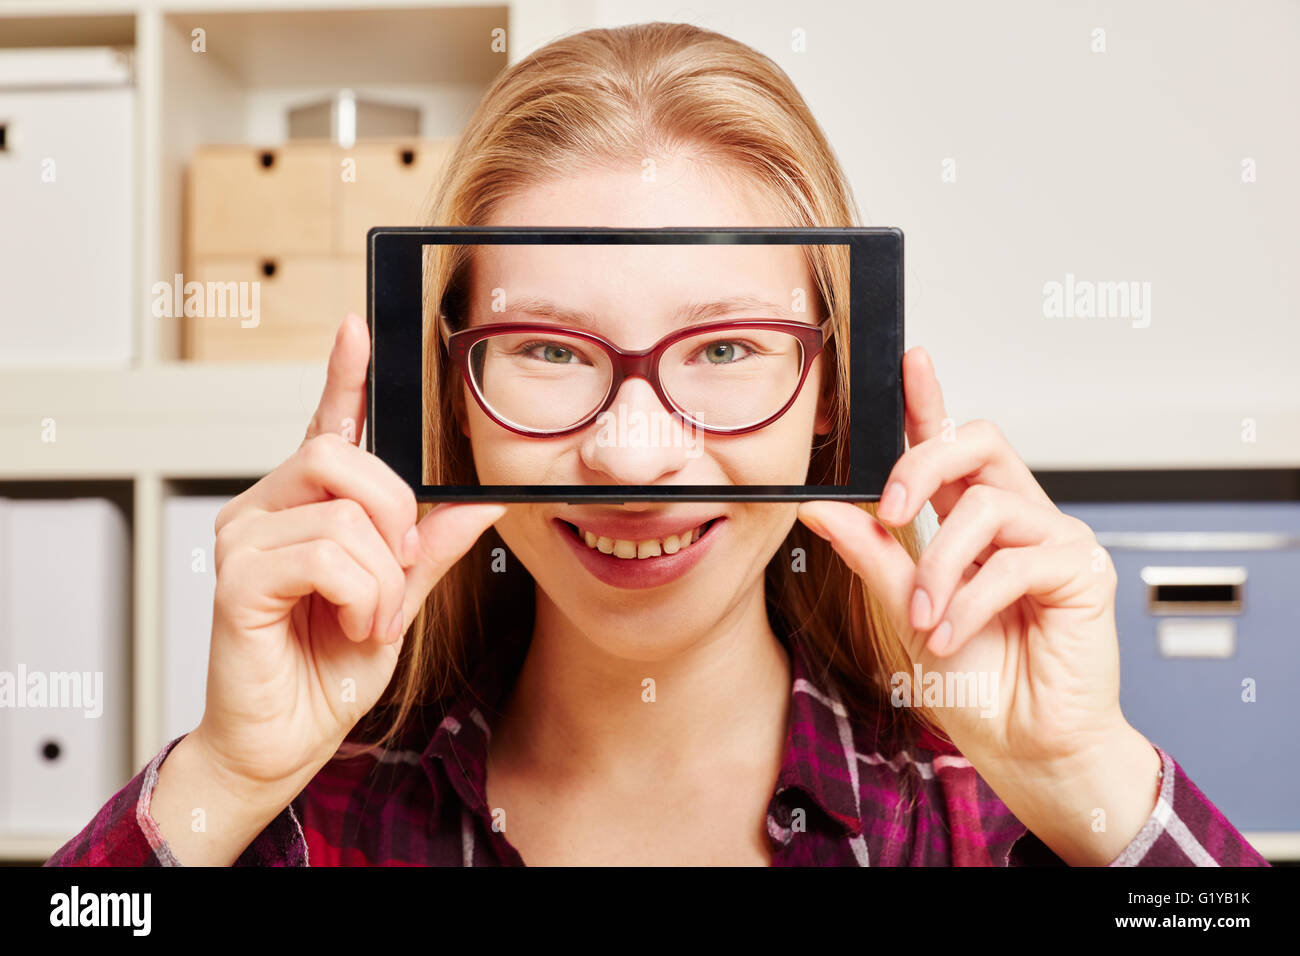 Young smiling woman holds a smartphone with her face in front of ther head Stock Photo